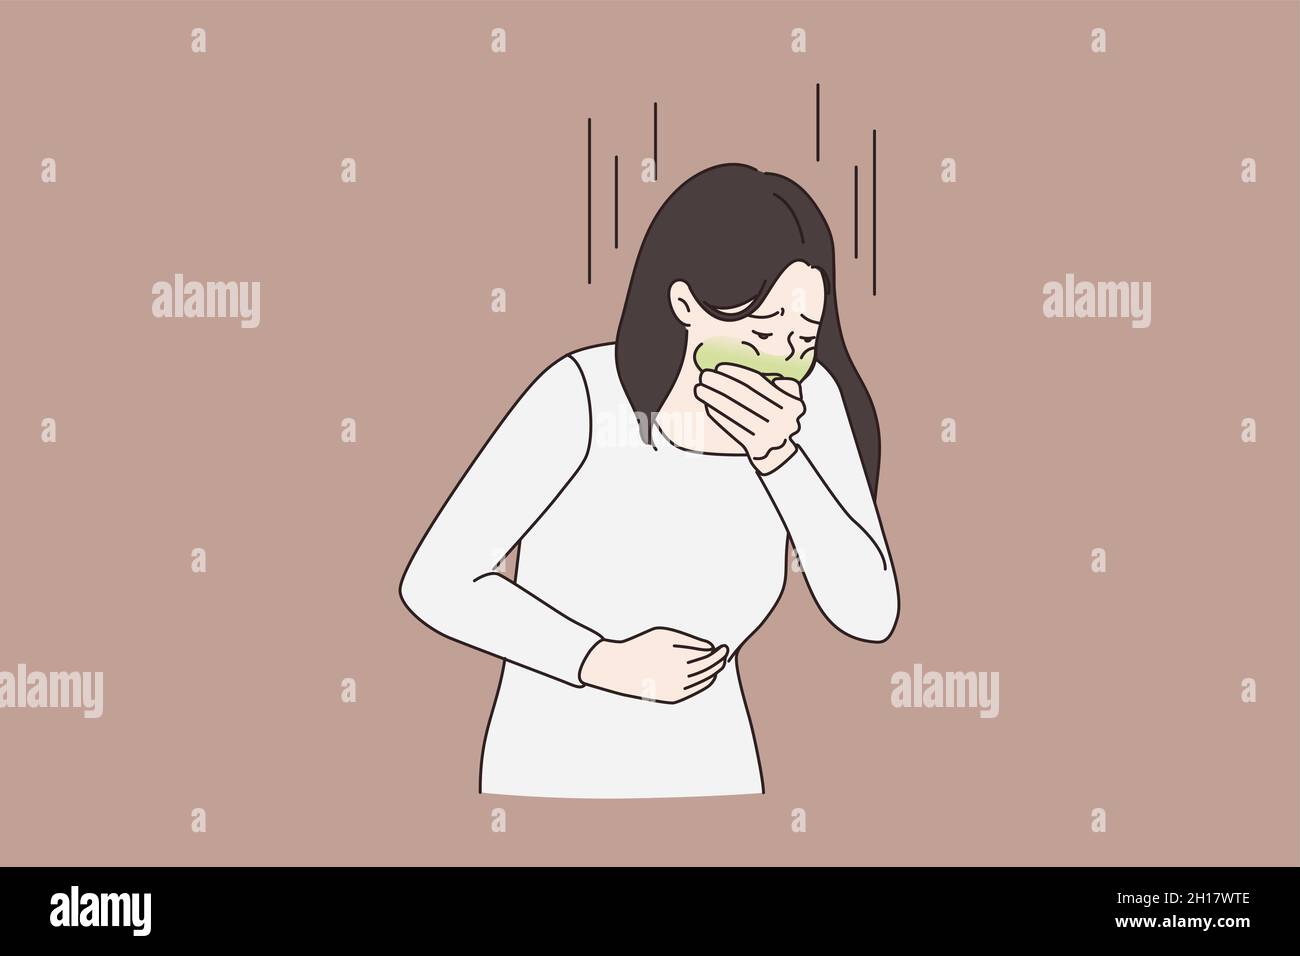 Woman with food poisoning Banque d'images vectorielles - Alamy